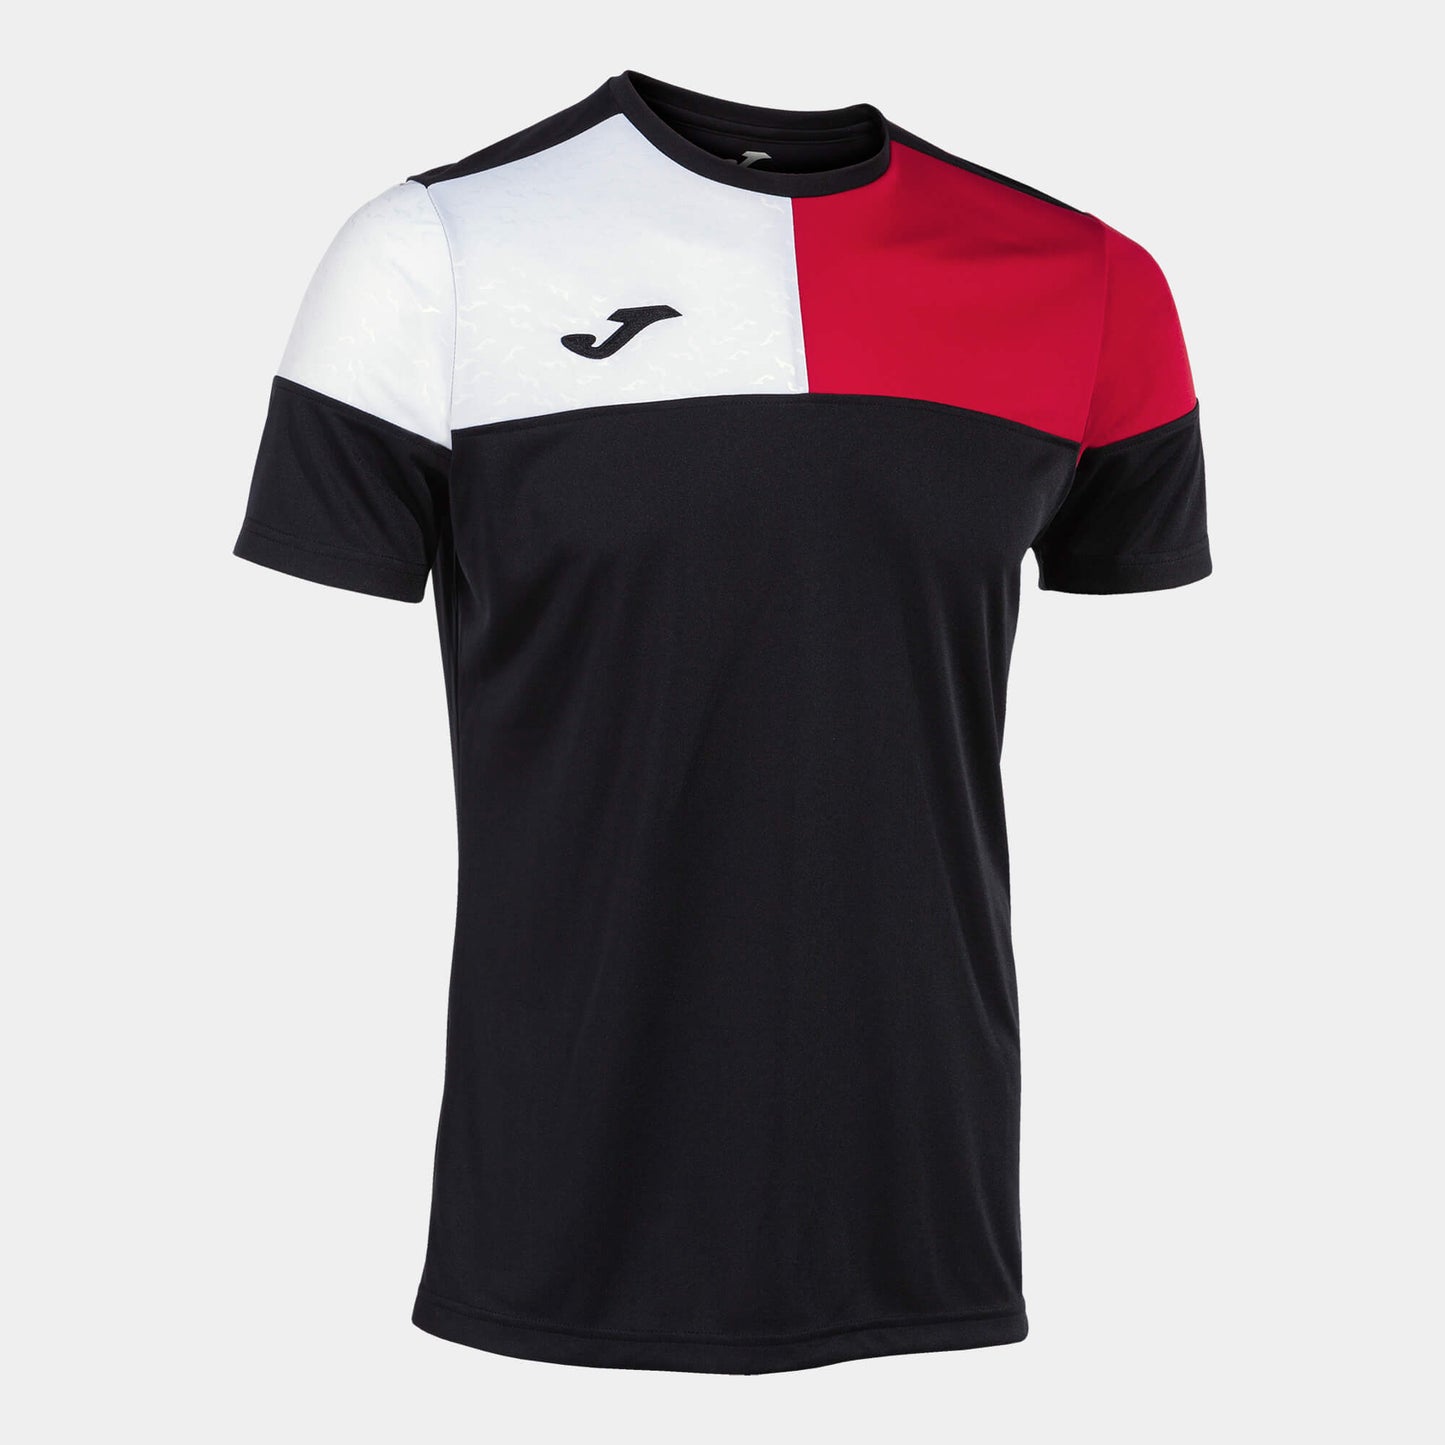 Joma Crew V Jersey Black Red (Front)